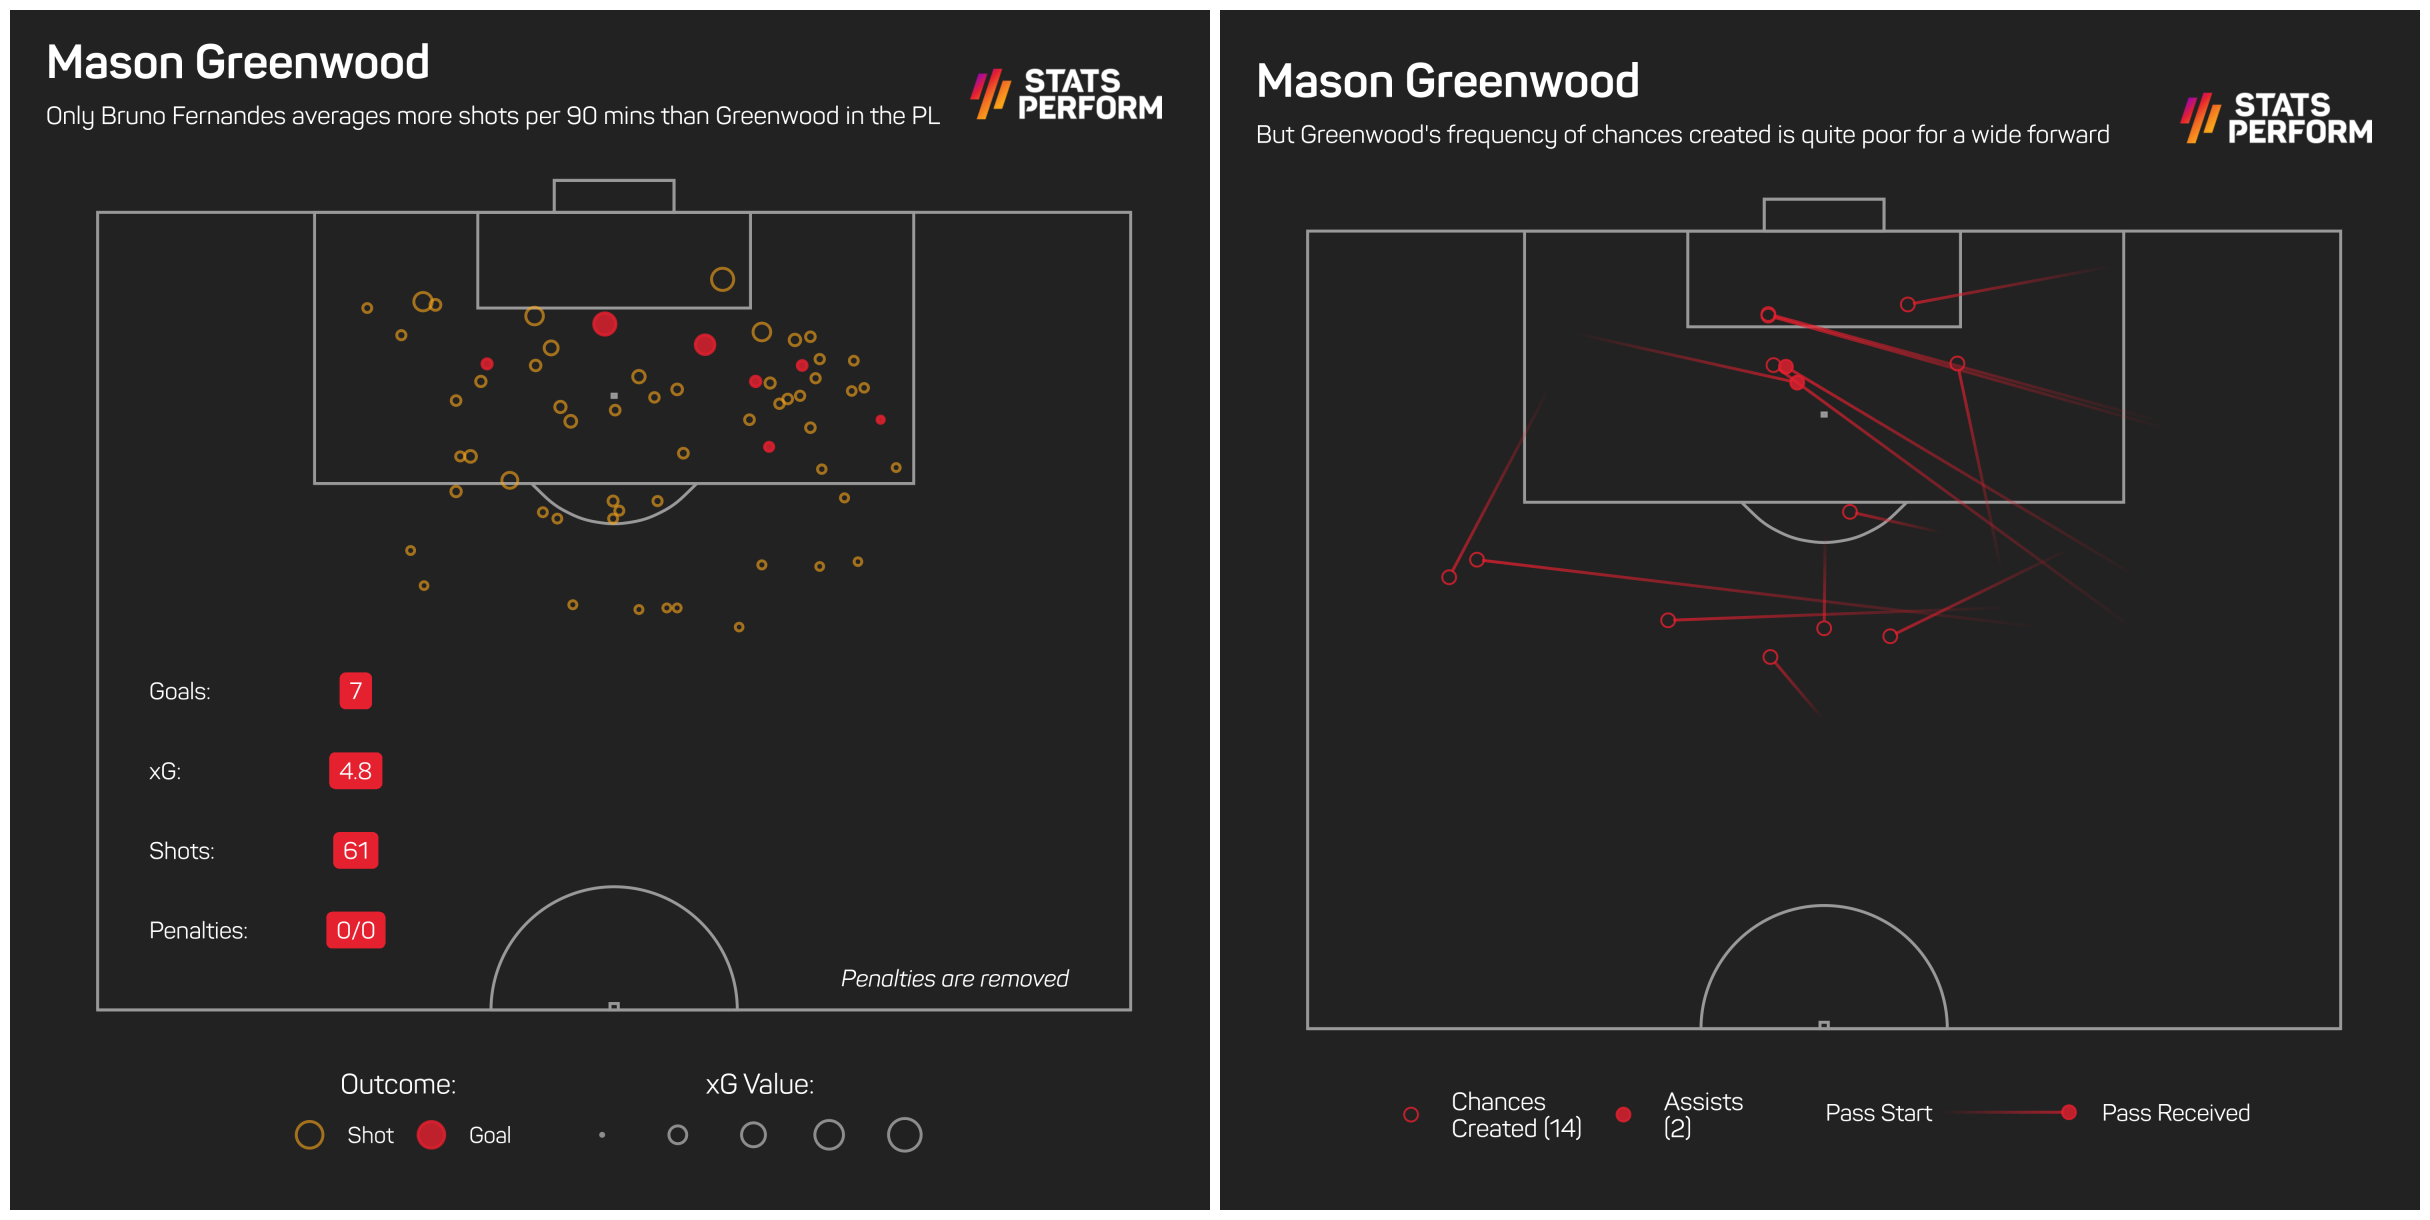 Greenwood averages a lot of shots, but not many chances created